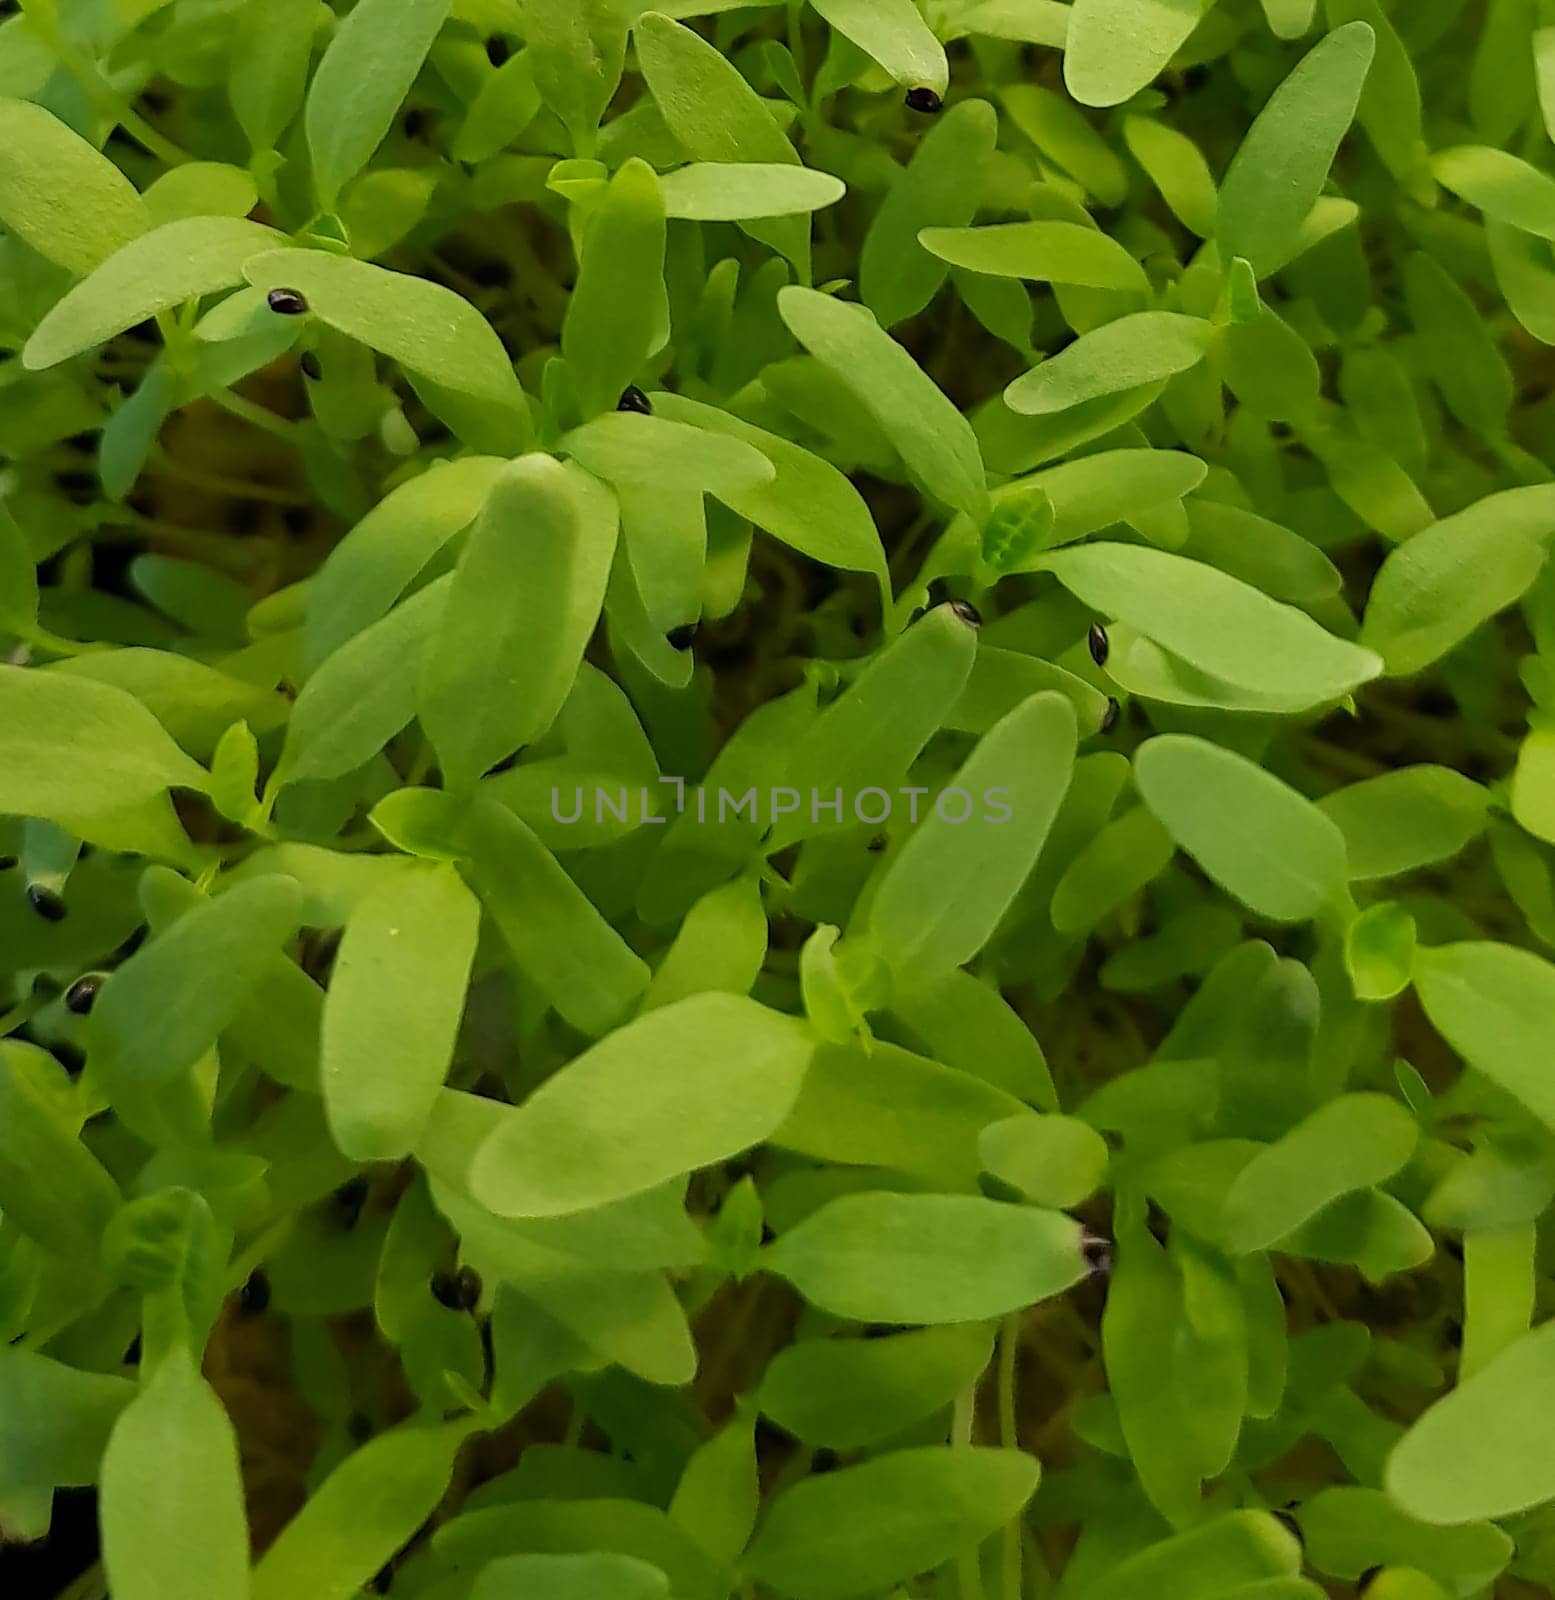 Stellaria media or Common chickweed or little mouse ear chickweed is an annual flowering plants in the carnation family Caryophllaceae.It is grown as a vegetable crop and ground cover for both human and poultry